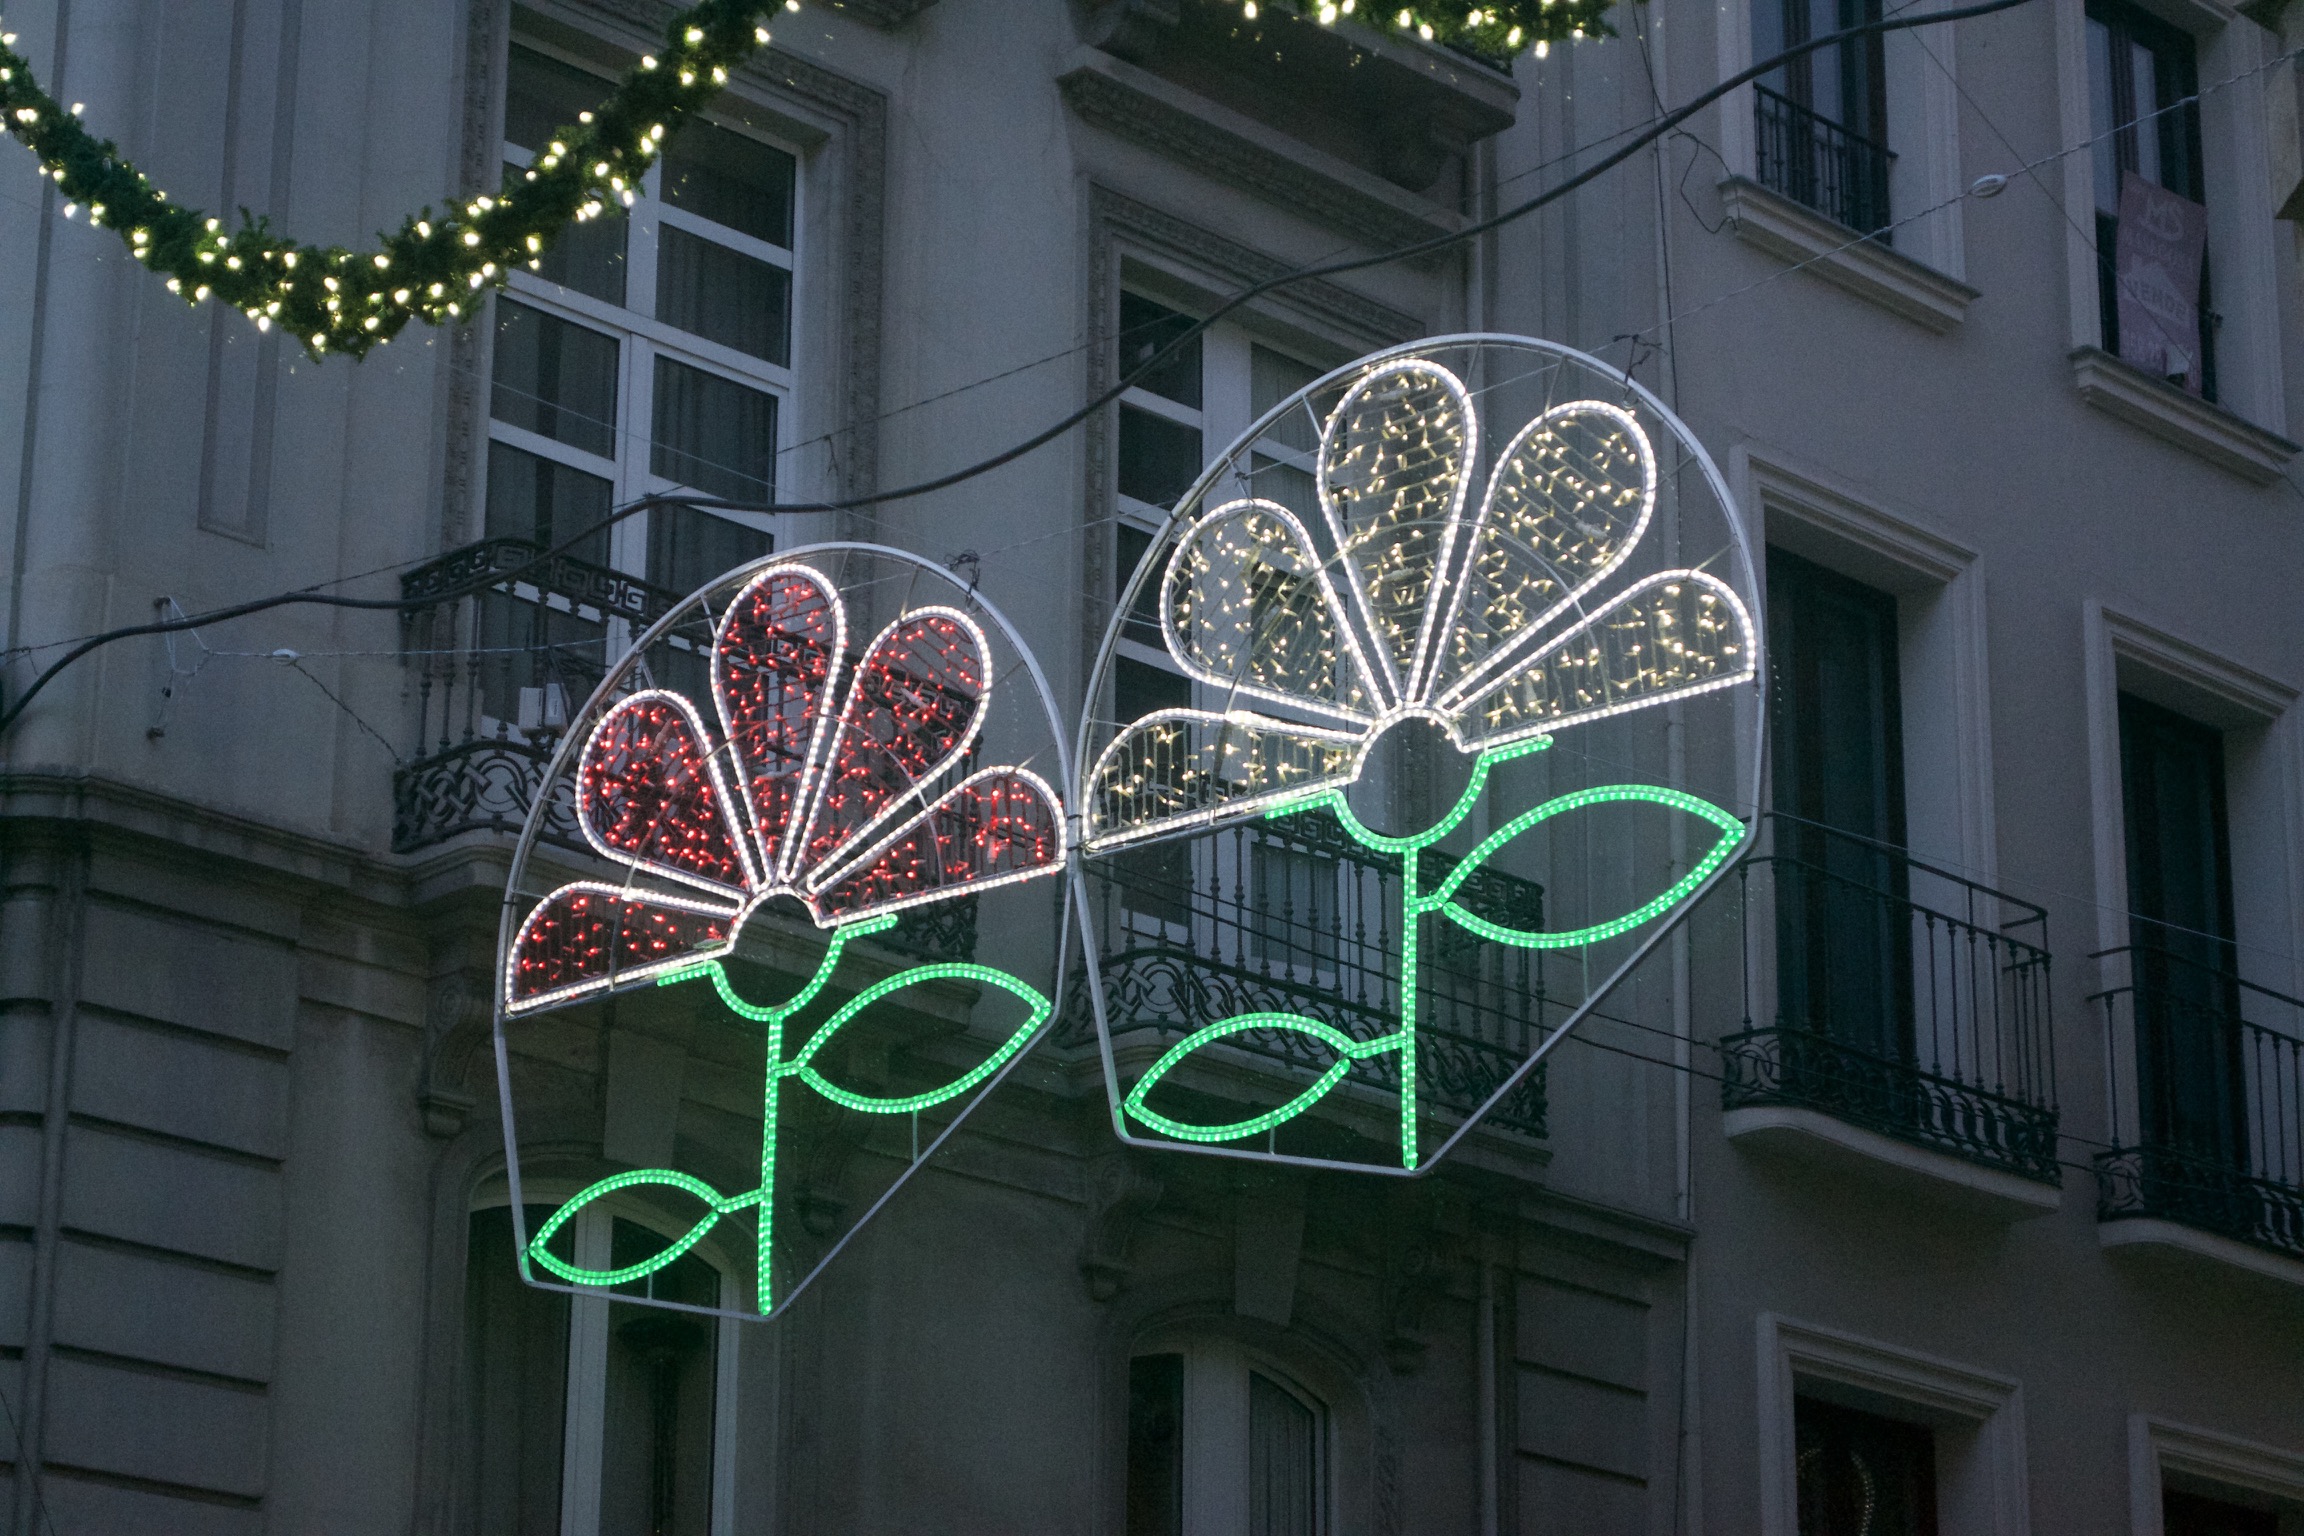 An illuminated wireframe image of two flowers hang in an alley.